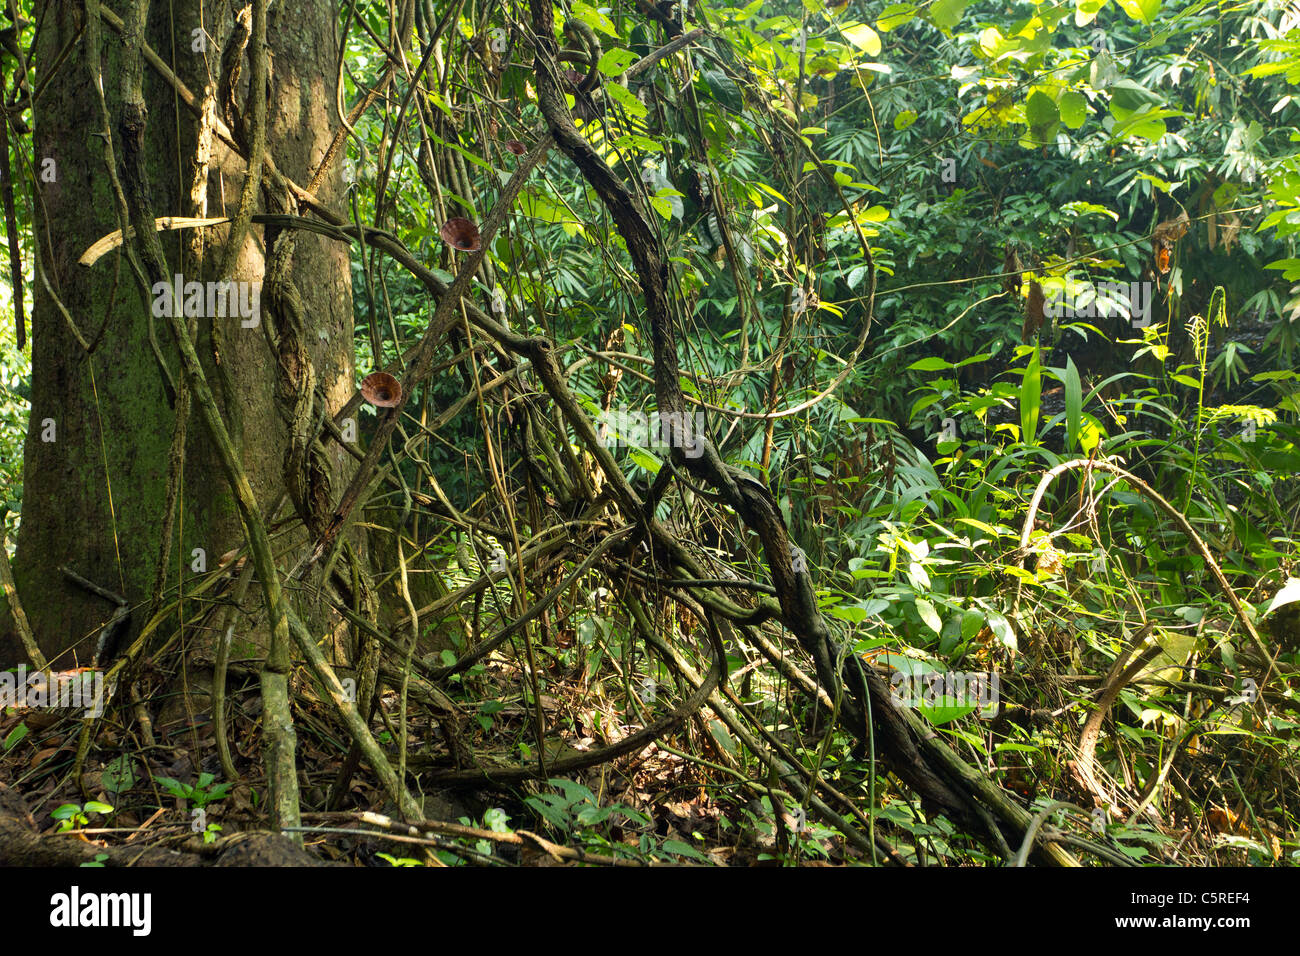 tree trunk and tangled vines in tropical rainforest, kaeng krachan national park, thailand Stock Photo